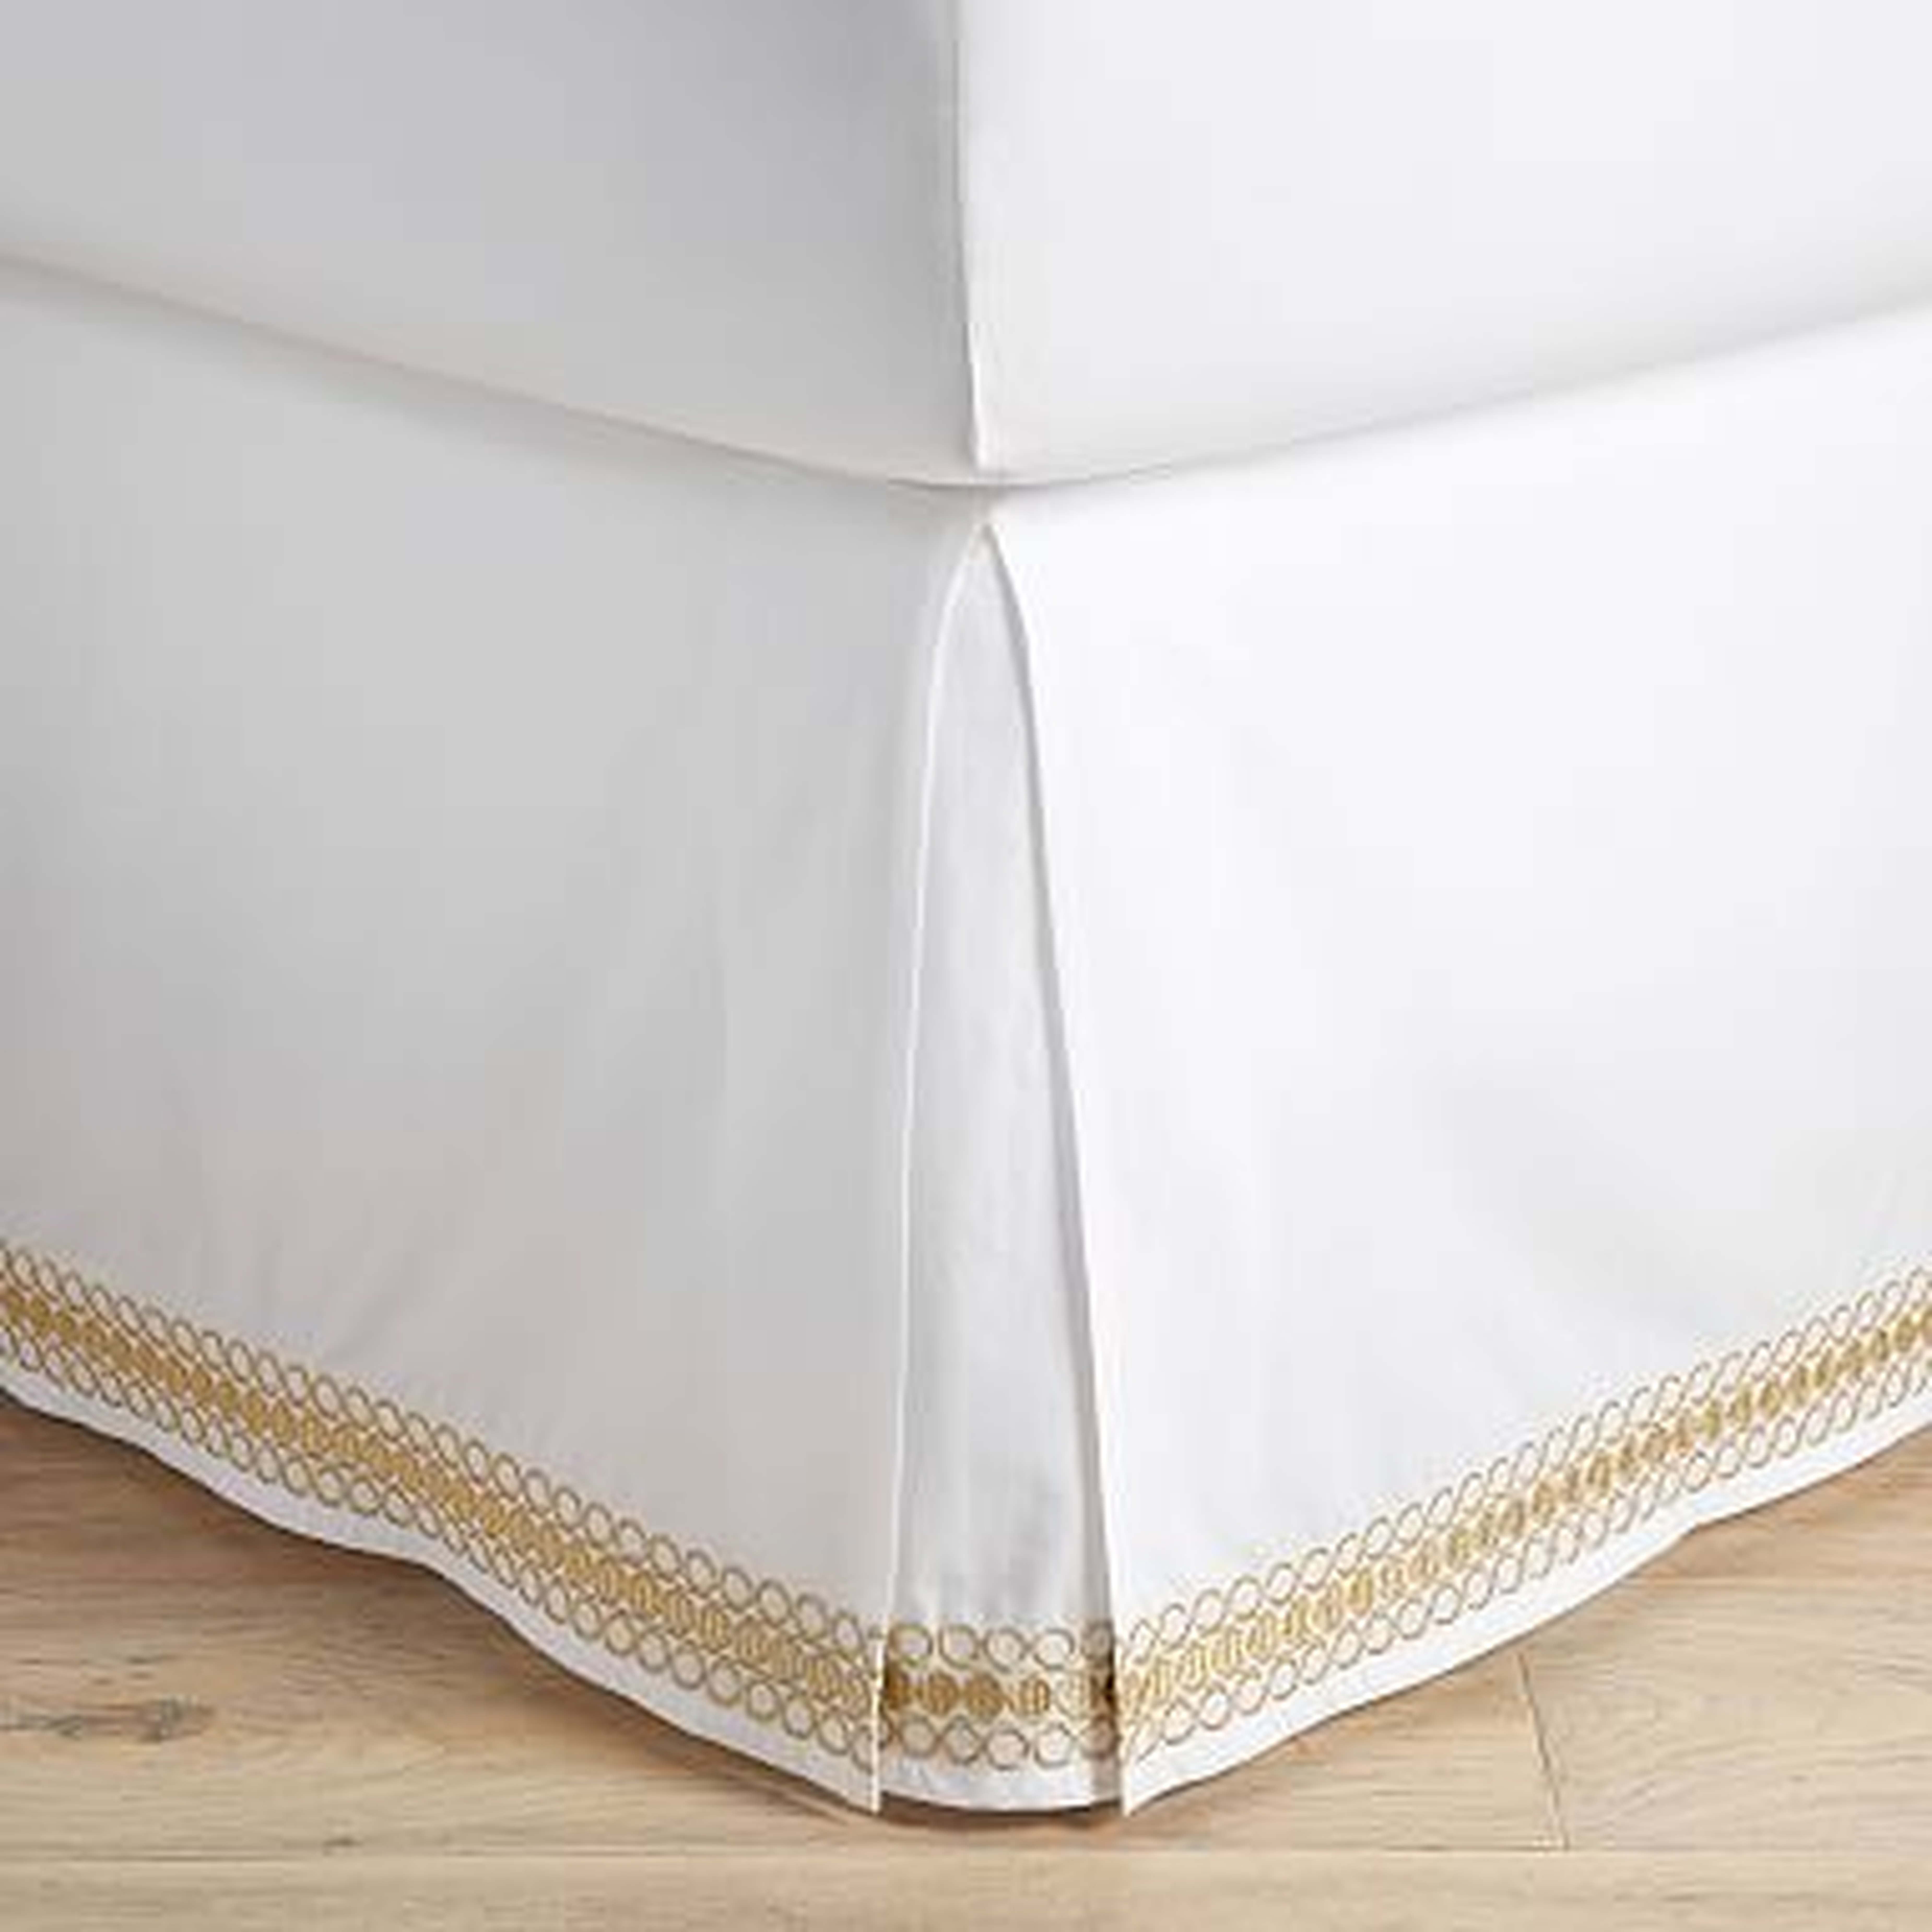 Lilly Pulitzer Organic Embroidered Trim Bed Skirt, Full, Gold - Pottery Barn Teen